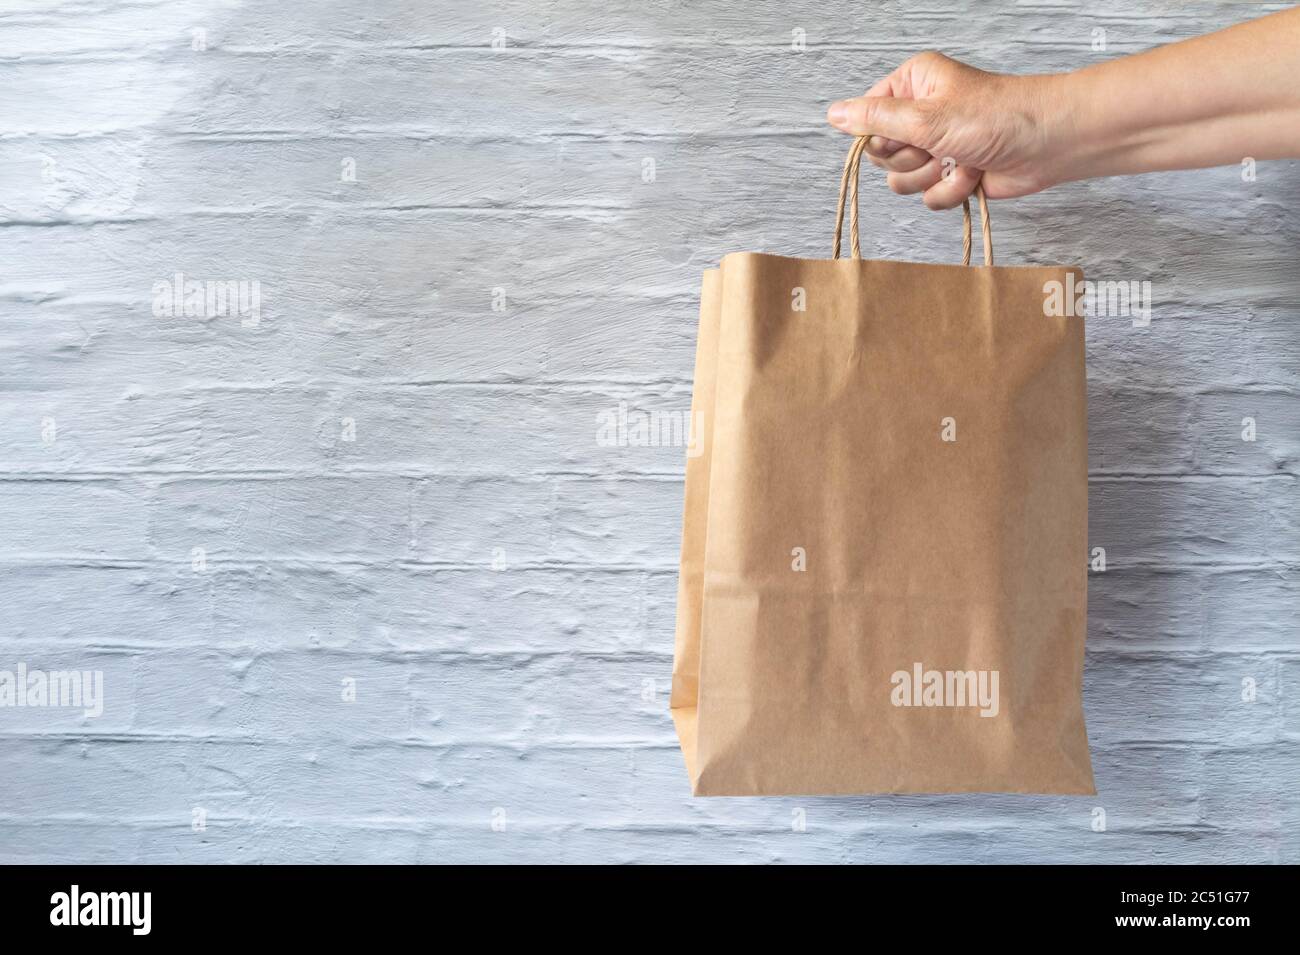 Hand holding paper bag on brick wall background. Paperboard bag in hand on vintage white brickwork wall. Makeup for donation or sponsorship concept Stock Photo